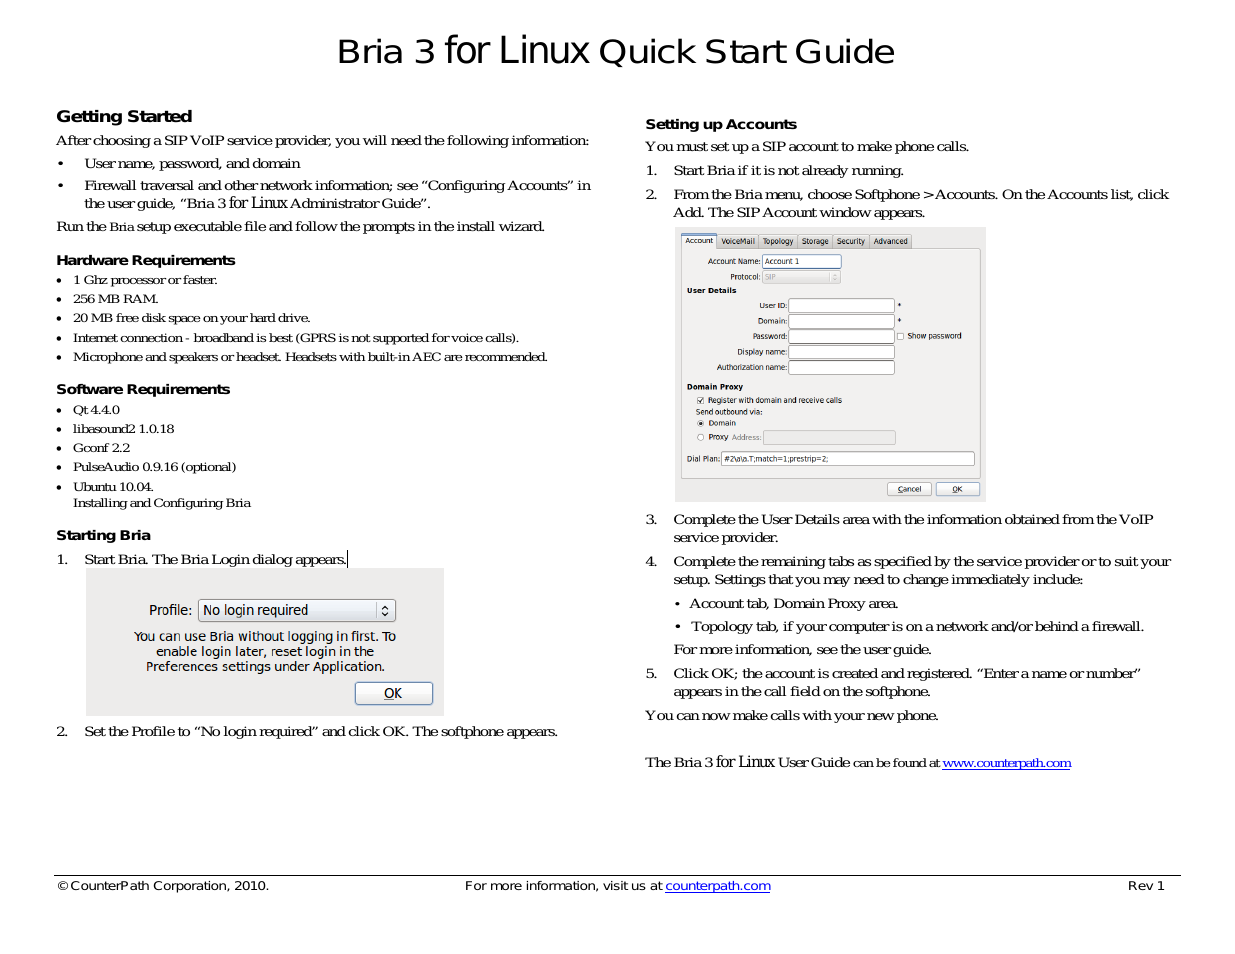 Bria for Linux Quick Start Guide